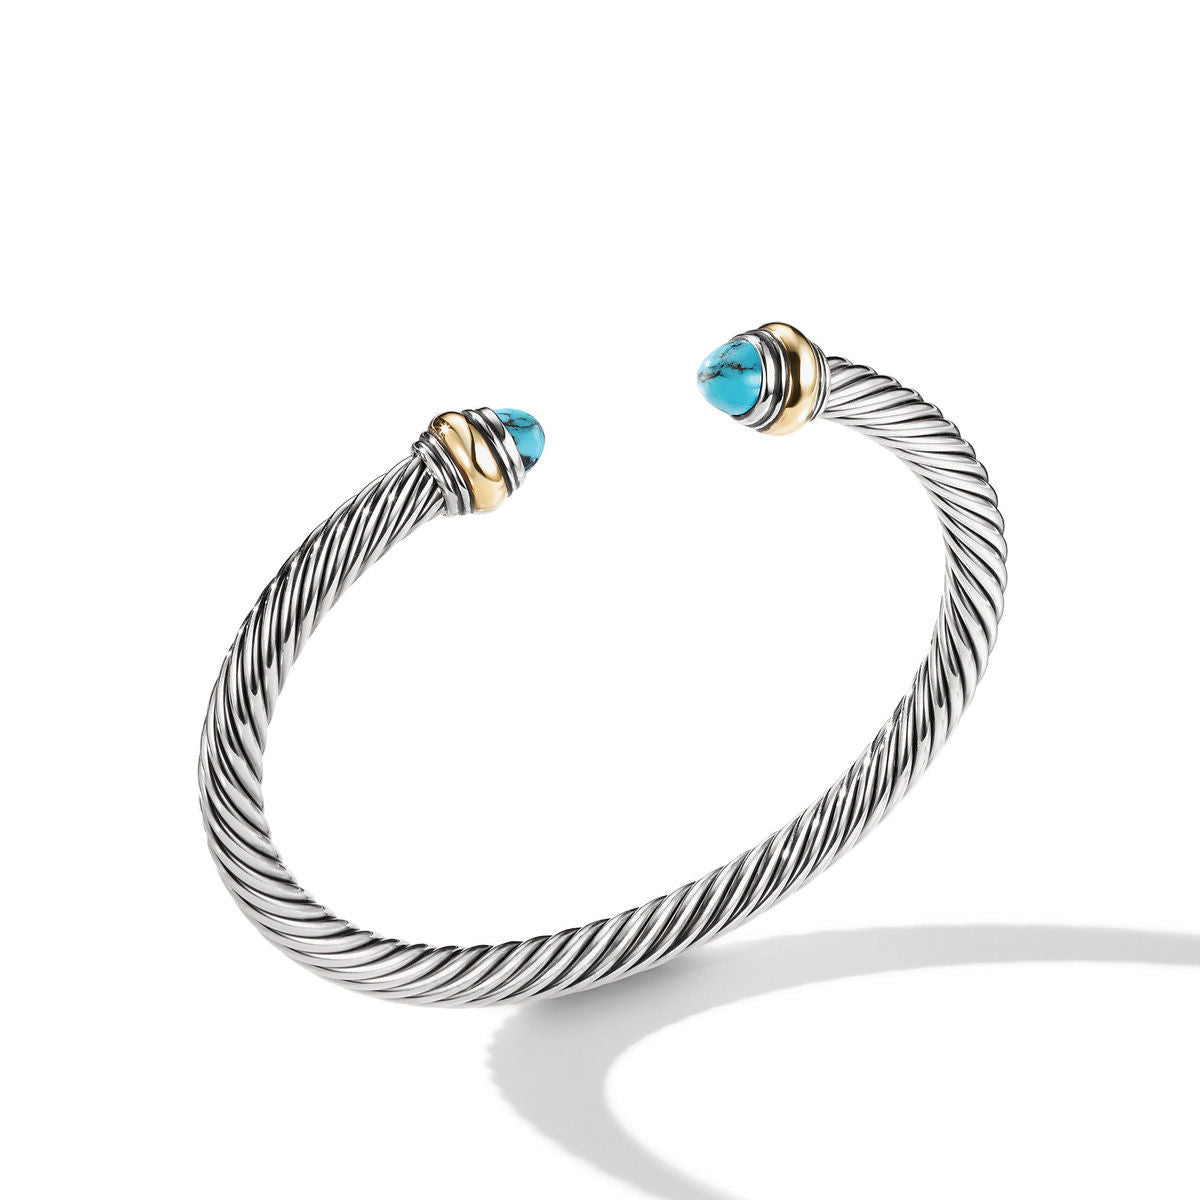 Bracelet with Turquoise and 14K Gold, Sterling Silver, Long's Jewelers